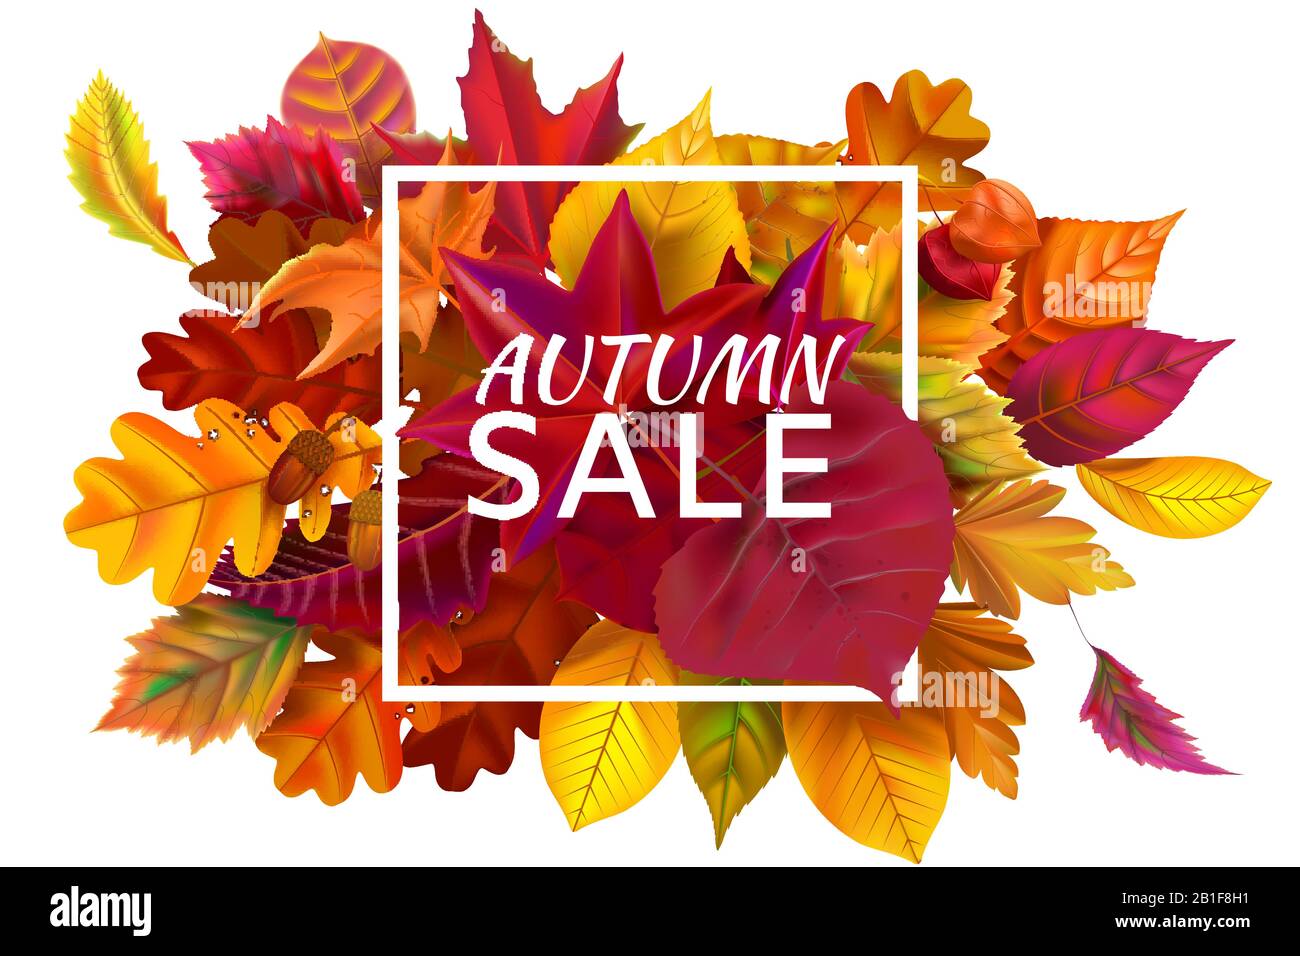 Fall sale banner. Autumn season sales, autumnal discount and fallen leaves banners frame vector illustration Stock Vector